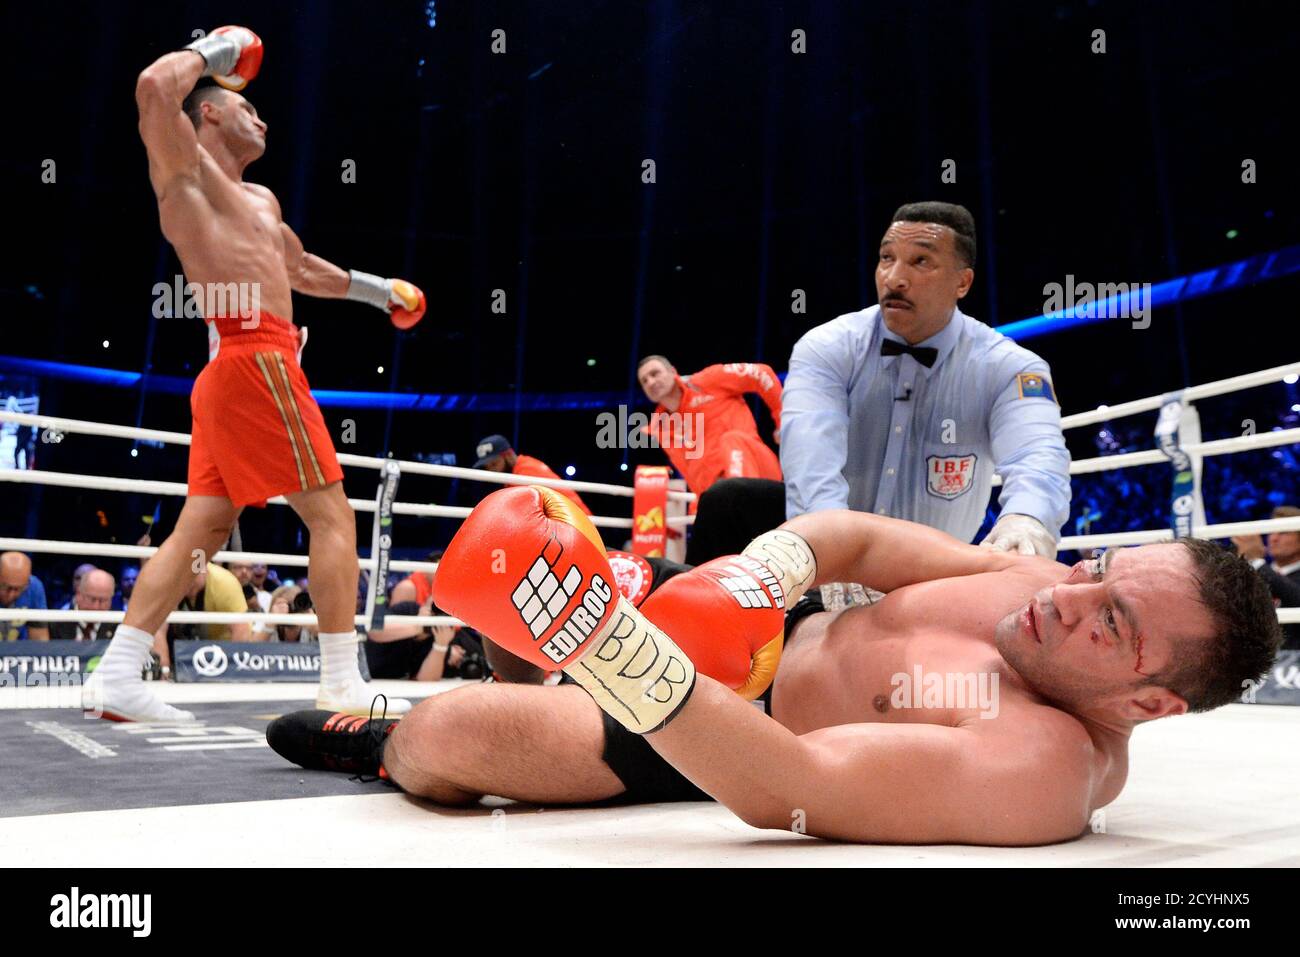 Tigge Sætte royalty Challenger Bulgarian heavyweight boxer Kubrat Pulev (R) lies in the ring  after being knocked down by Ukrainian WBA, WBO, IBO and IBF heavyweight  boxing world champion Vladimir Klitschko (L), who celebrates with